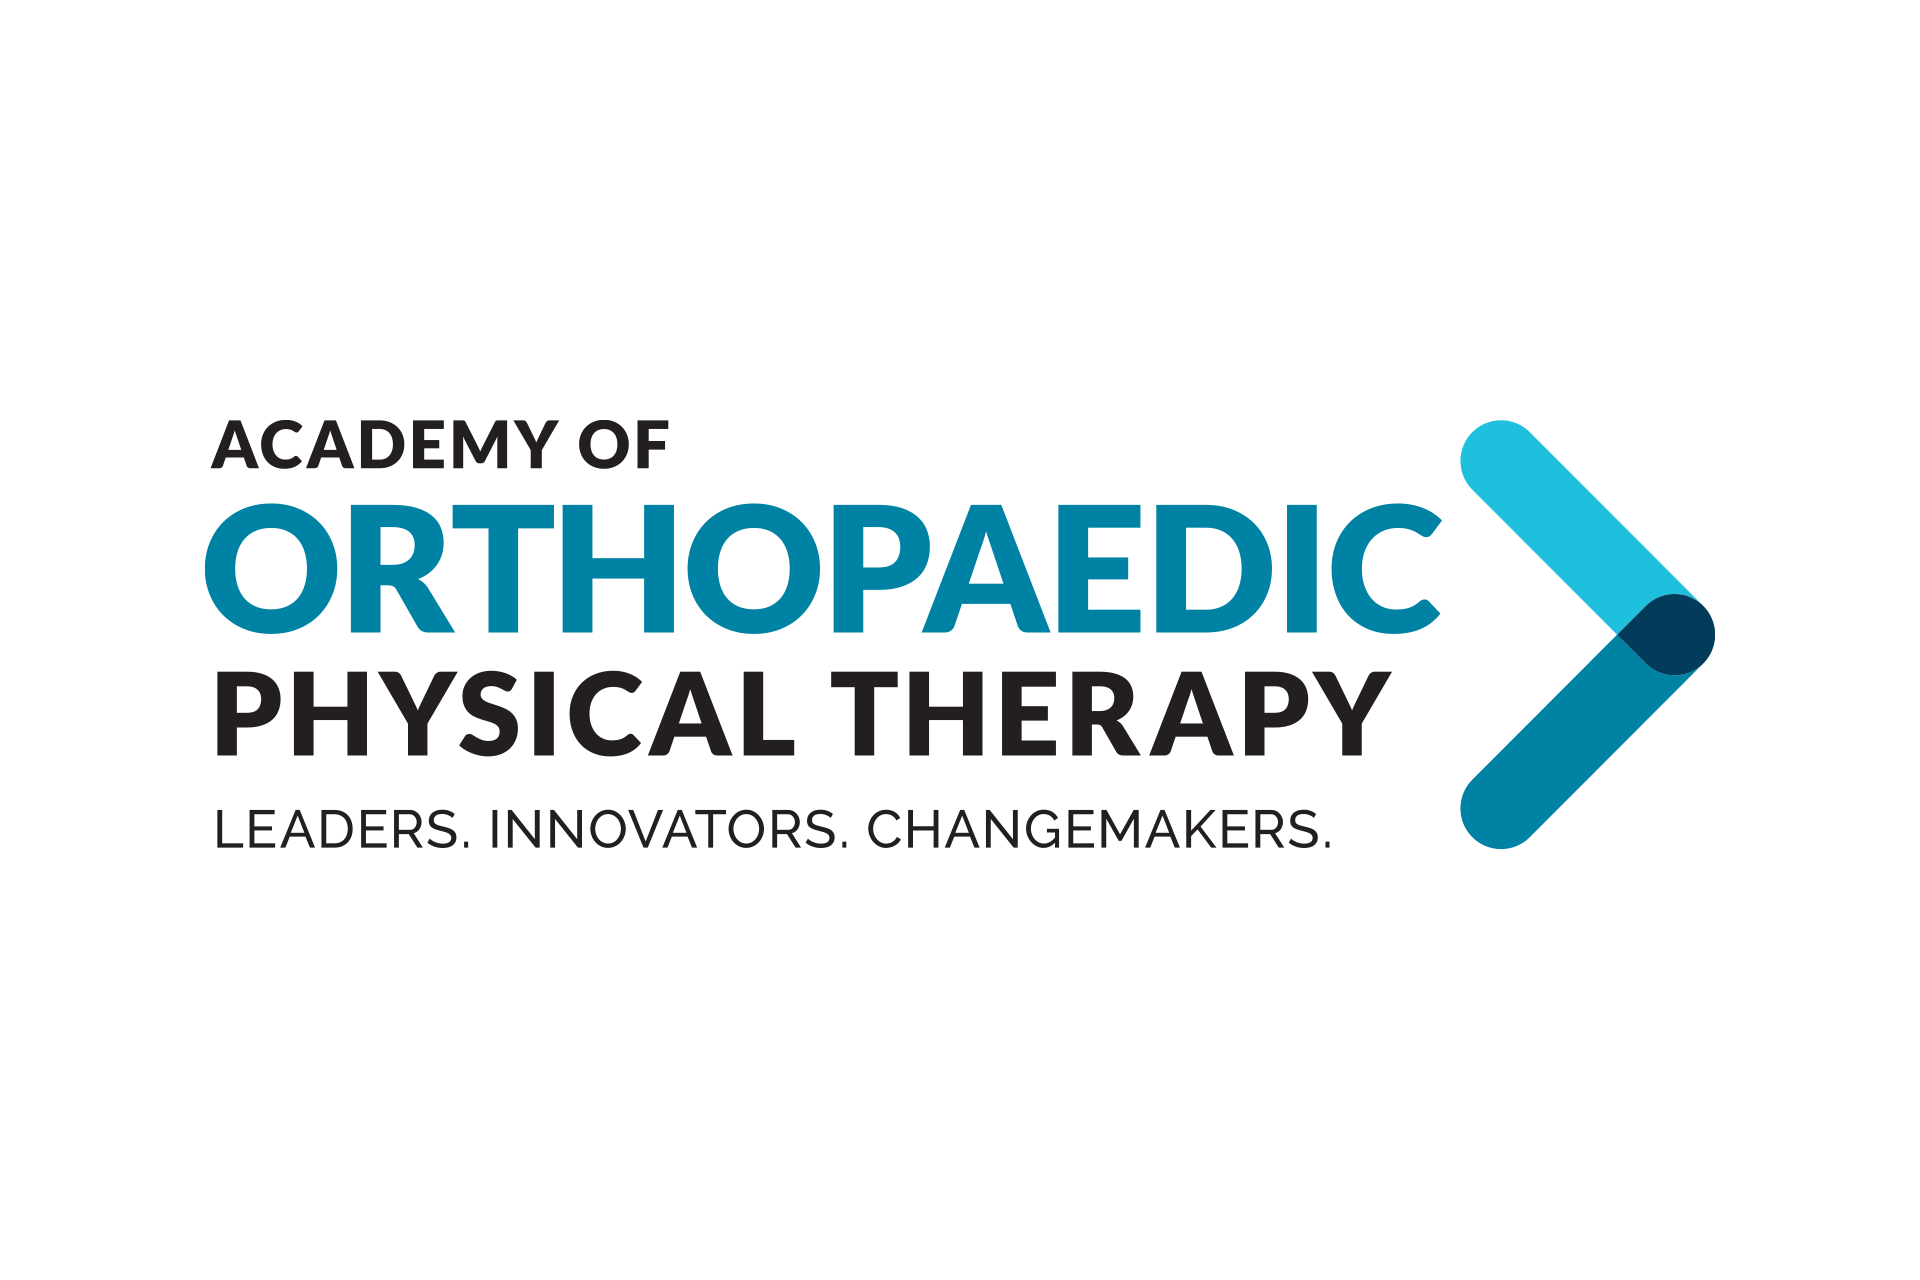 Academy of Orthopaedic Physical Therapy logo